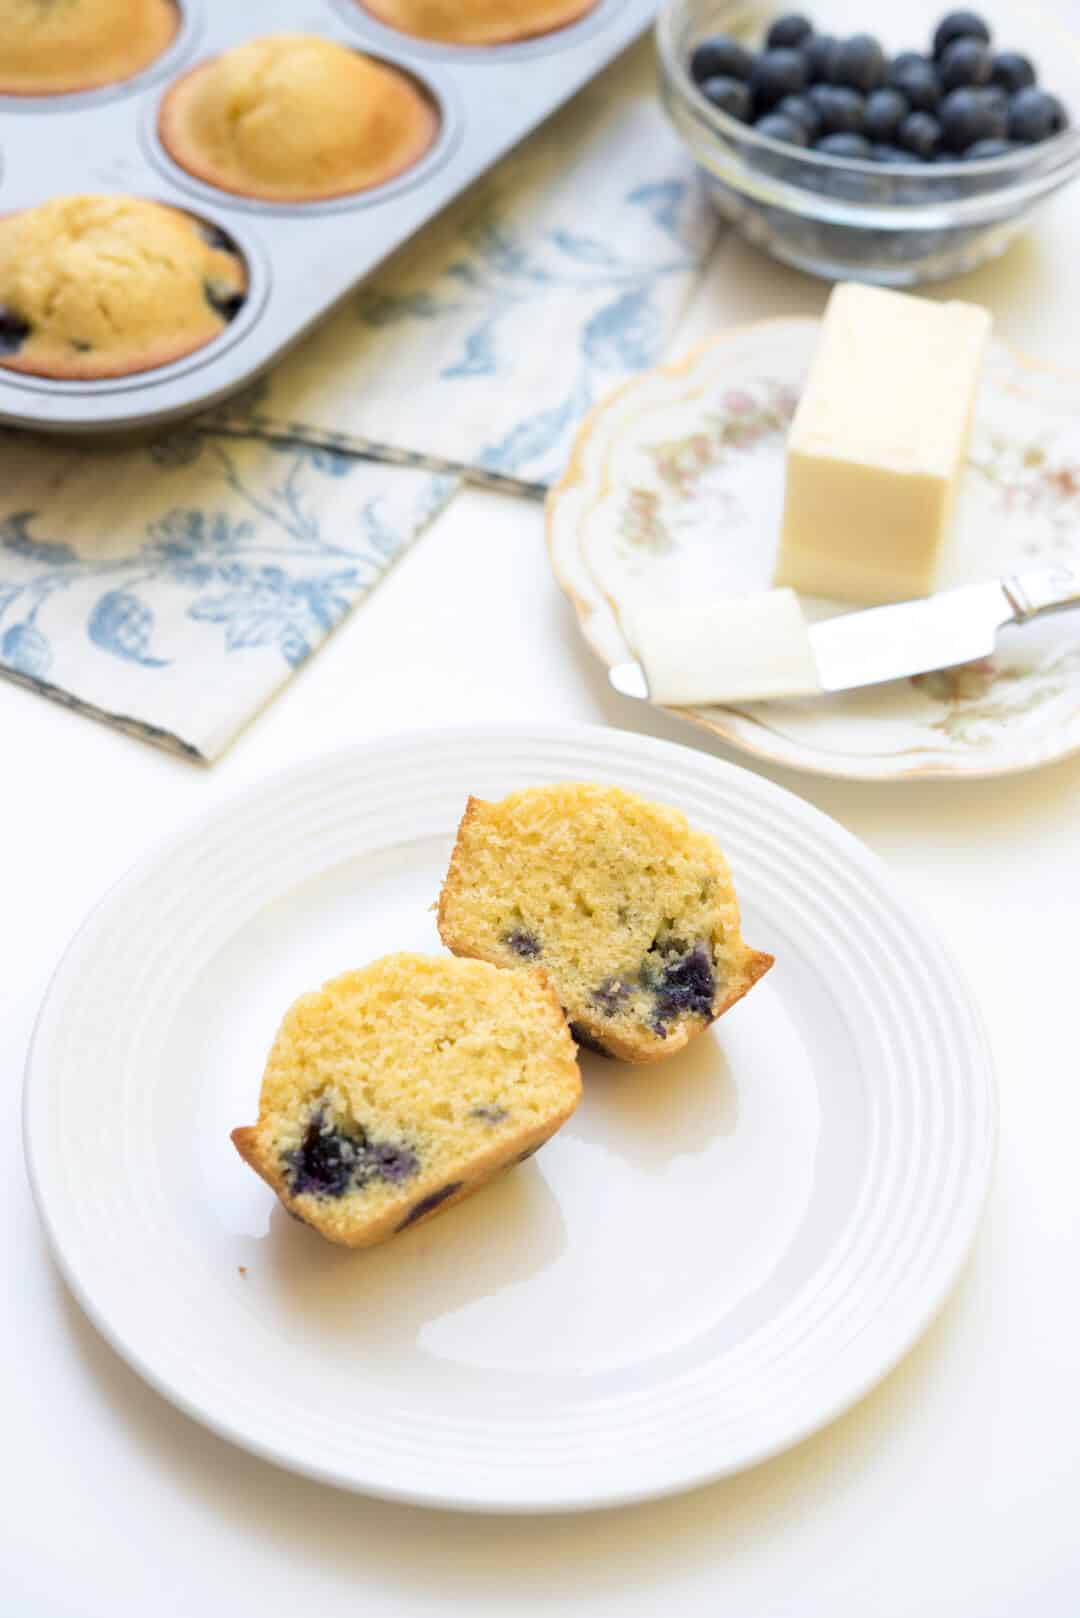 A Blueberry Cornmeal Muffin sliced in half on a white plate.